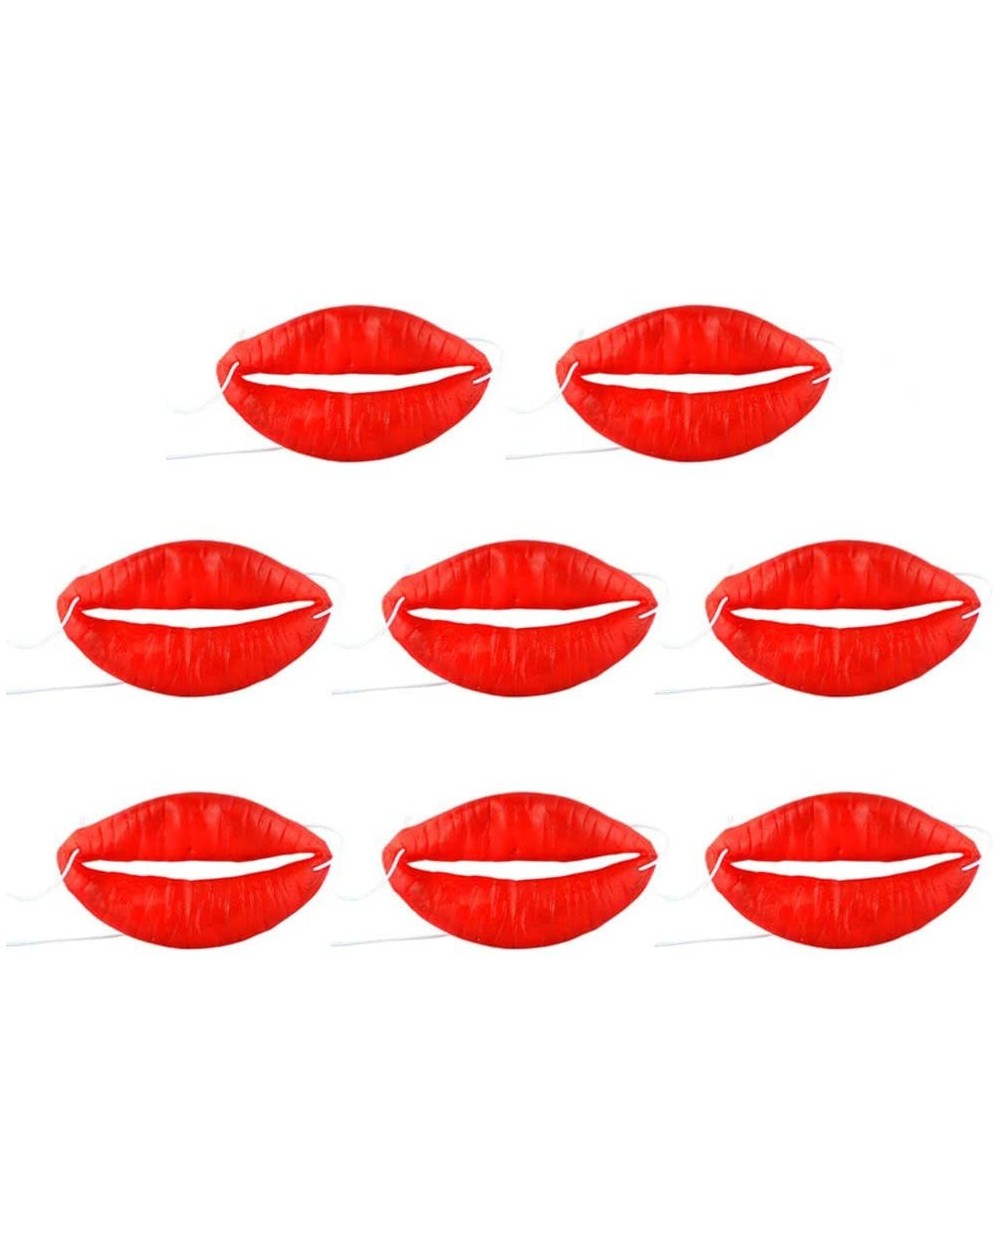 Party Favors 8pcs Halloween Big Red Lips Big Mouth Halloween Funny Horror Masquerade Cosplay Costume Props - C018XHENT9Y $12.54